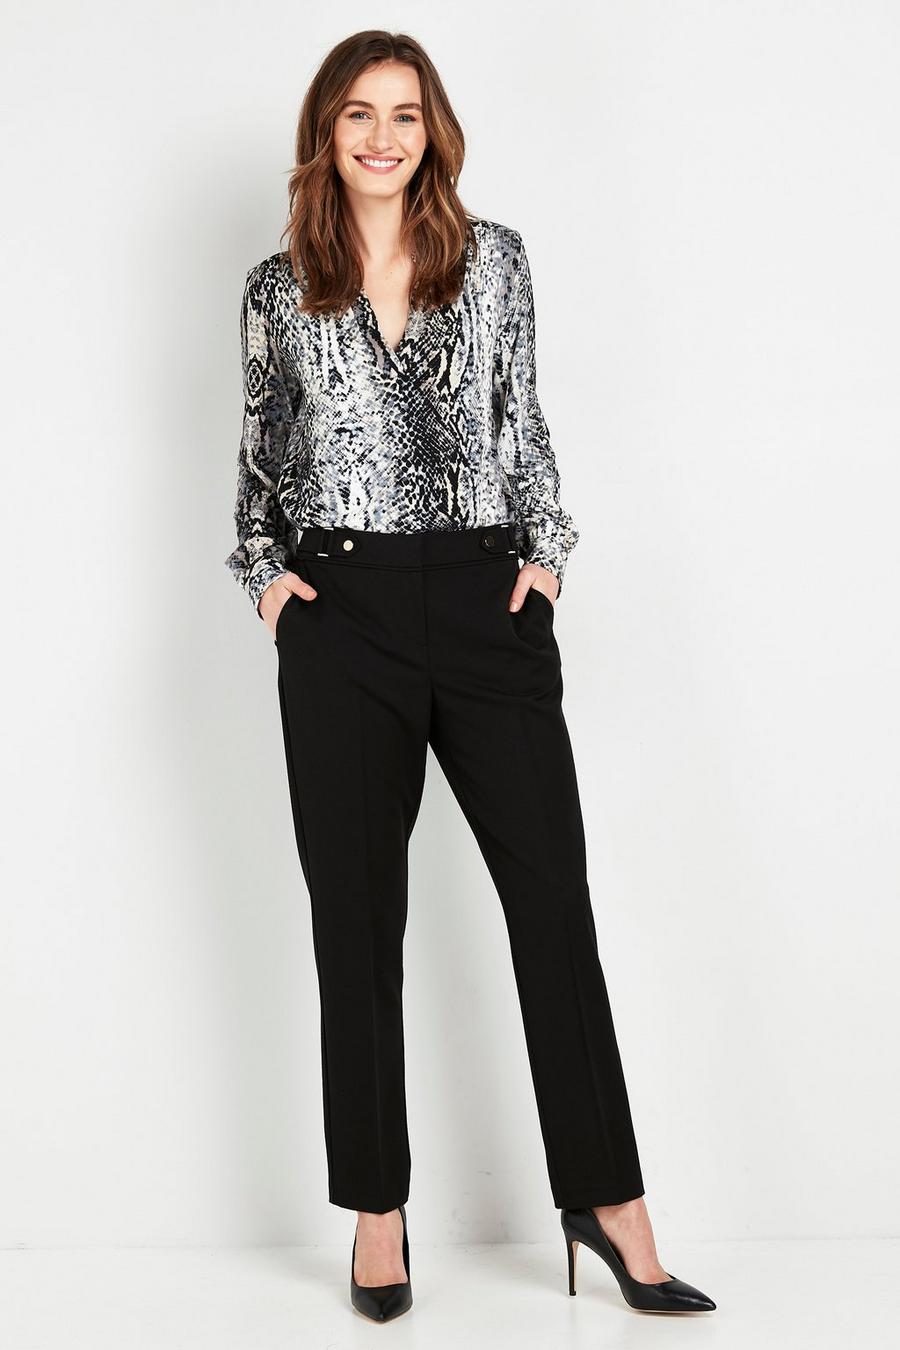 PETITE Black Tapered Trousers